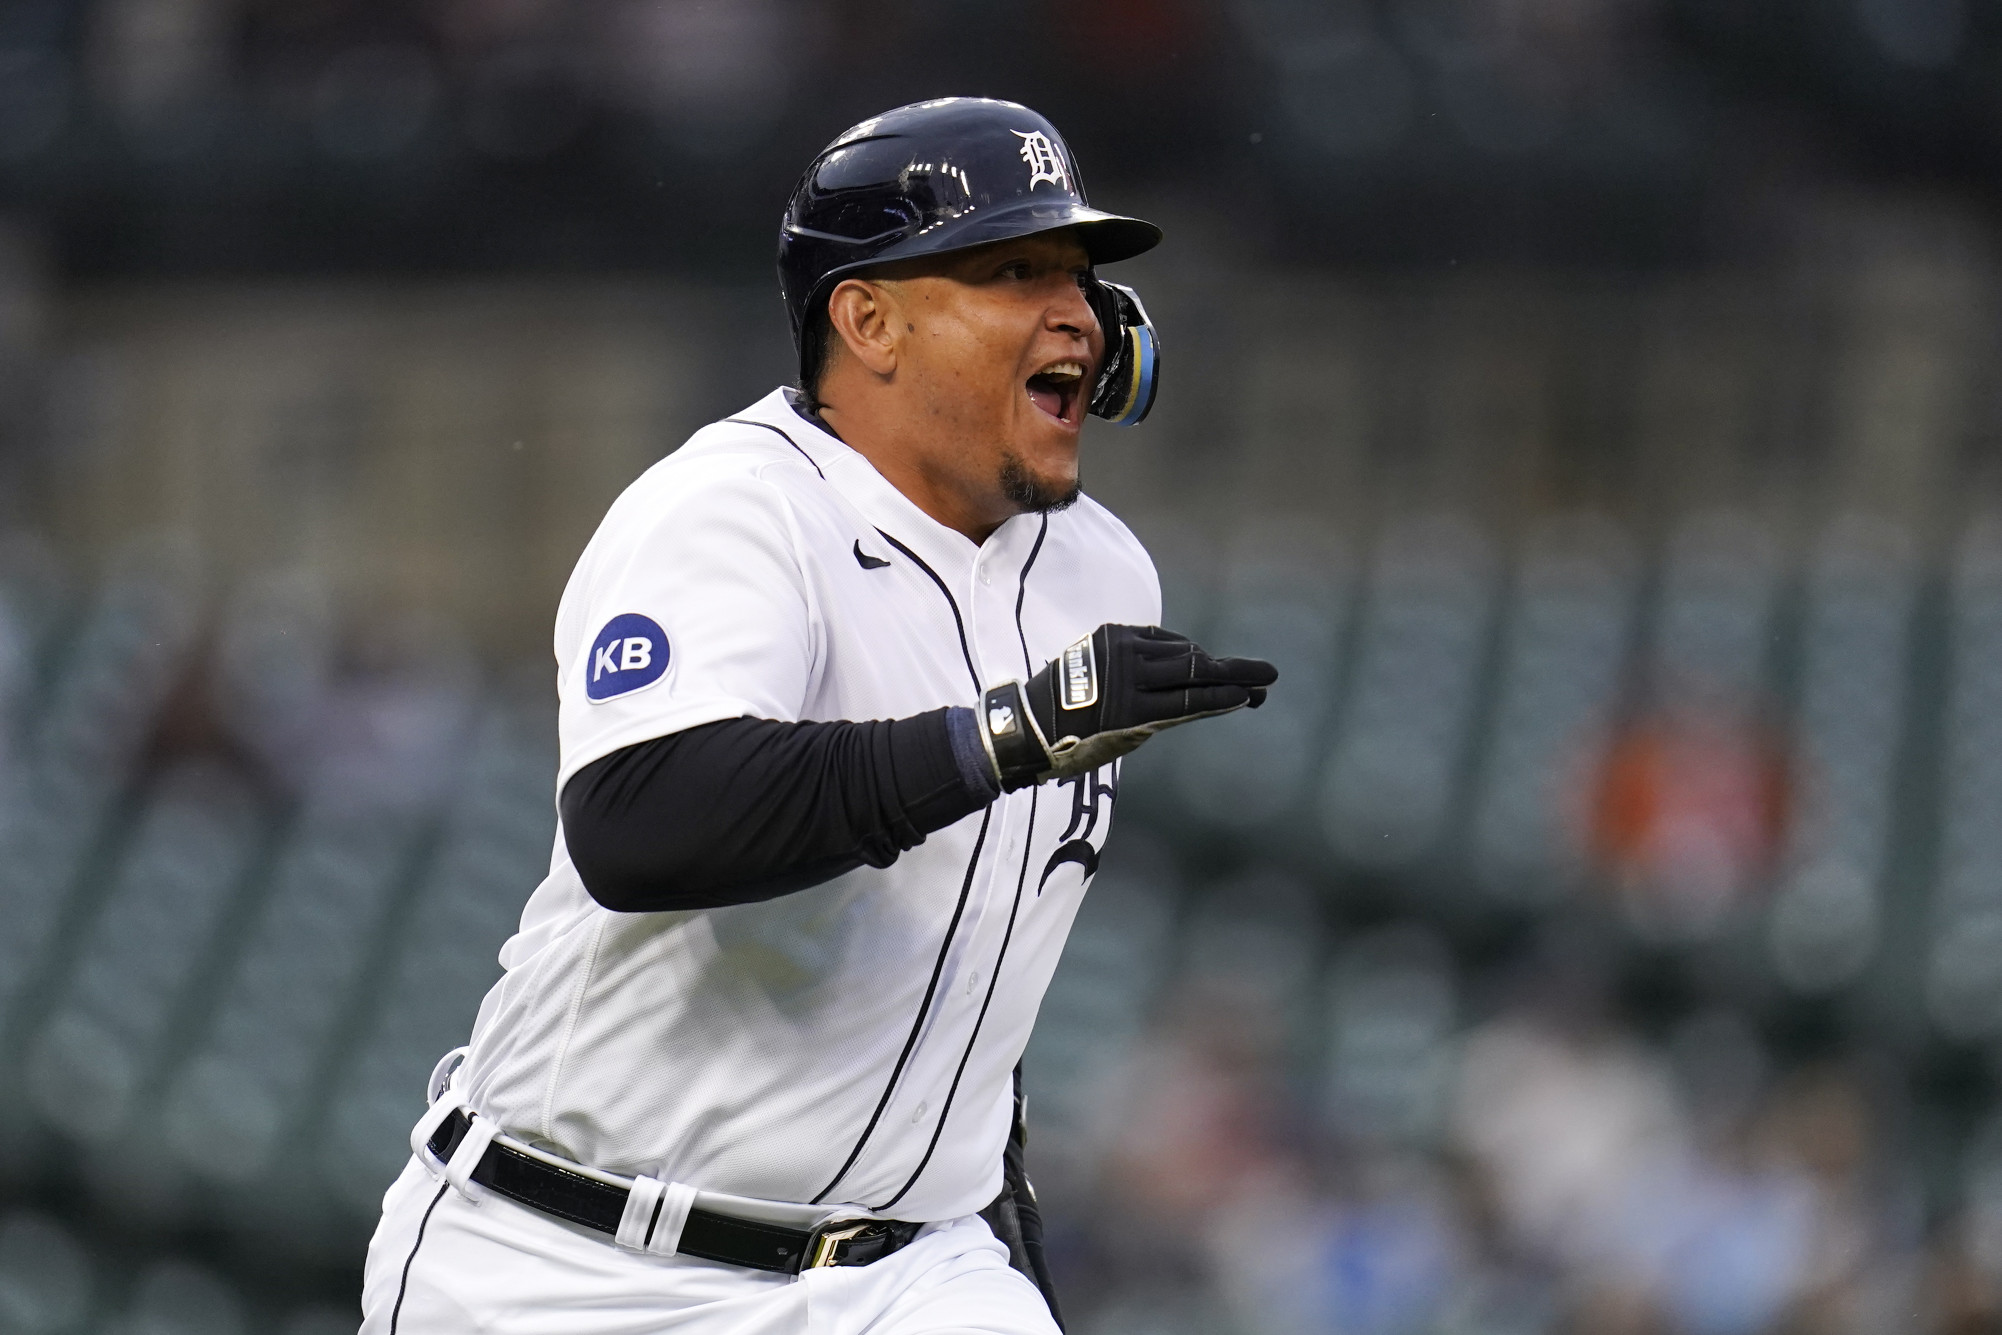 FOX Sports: MLB on X: Miguel Cabrera becomes the 7th player in